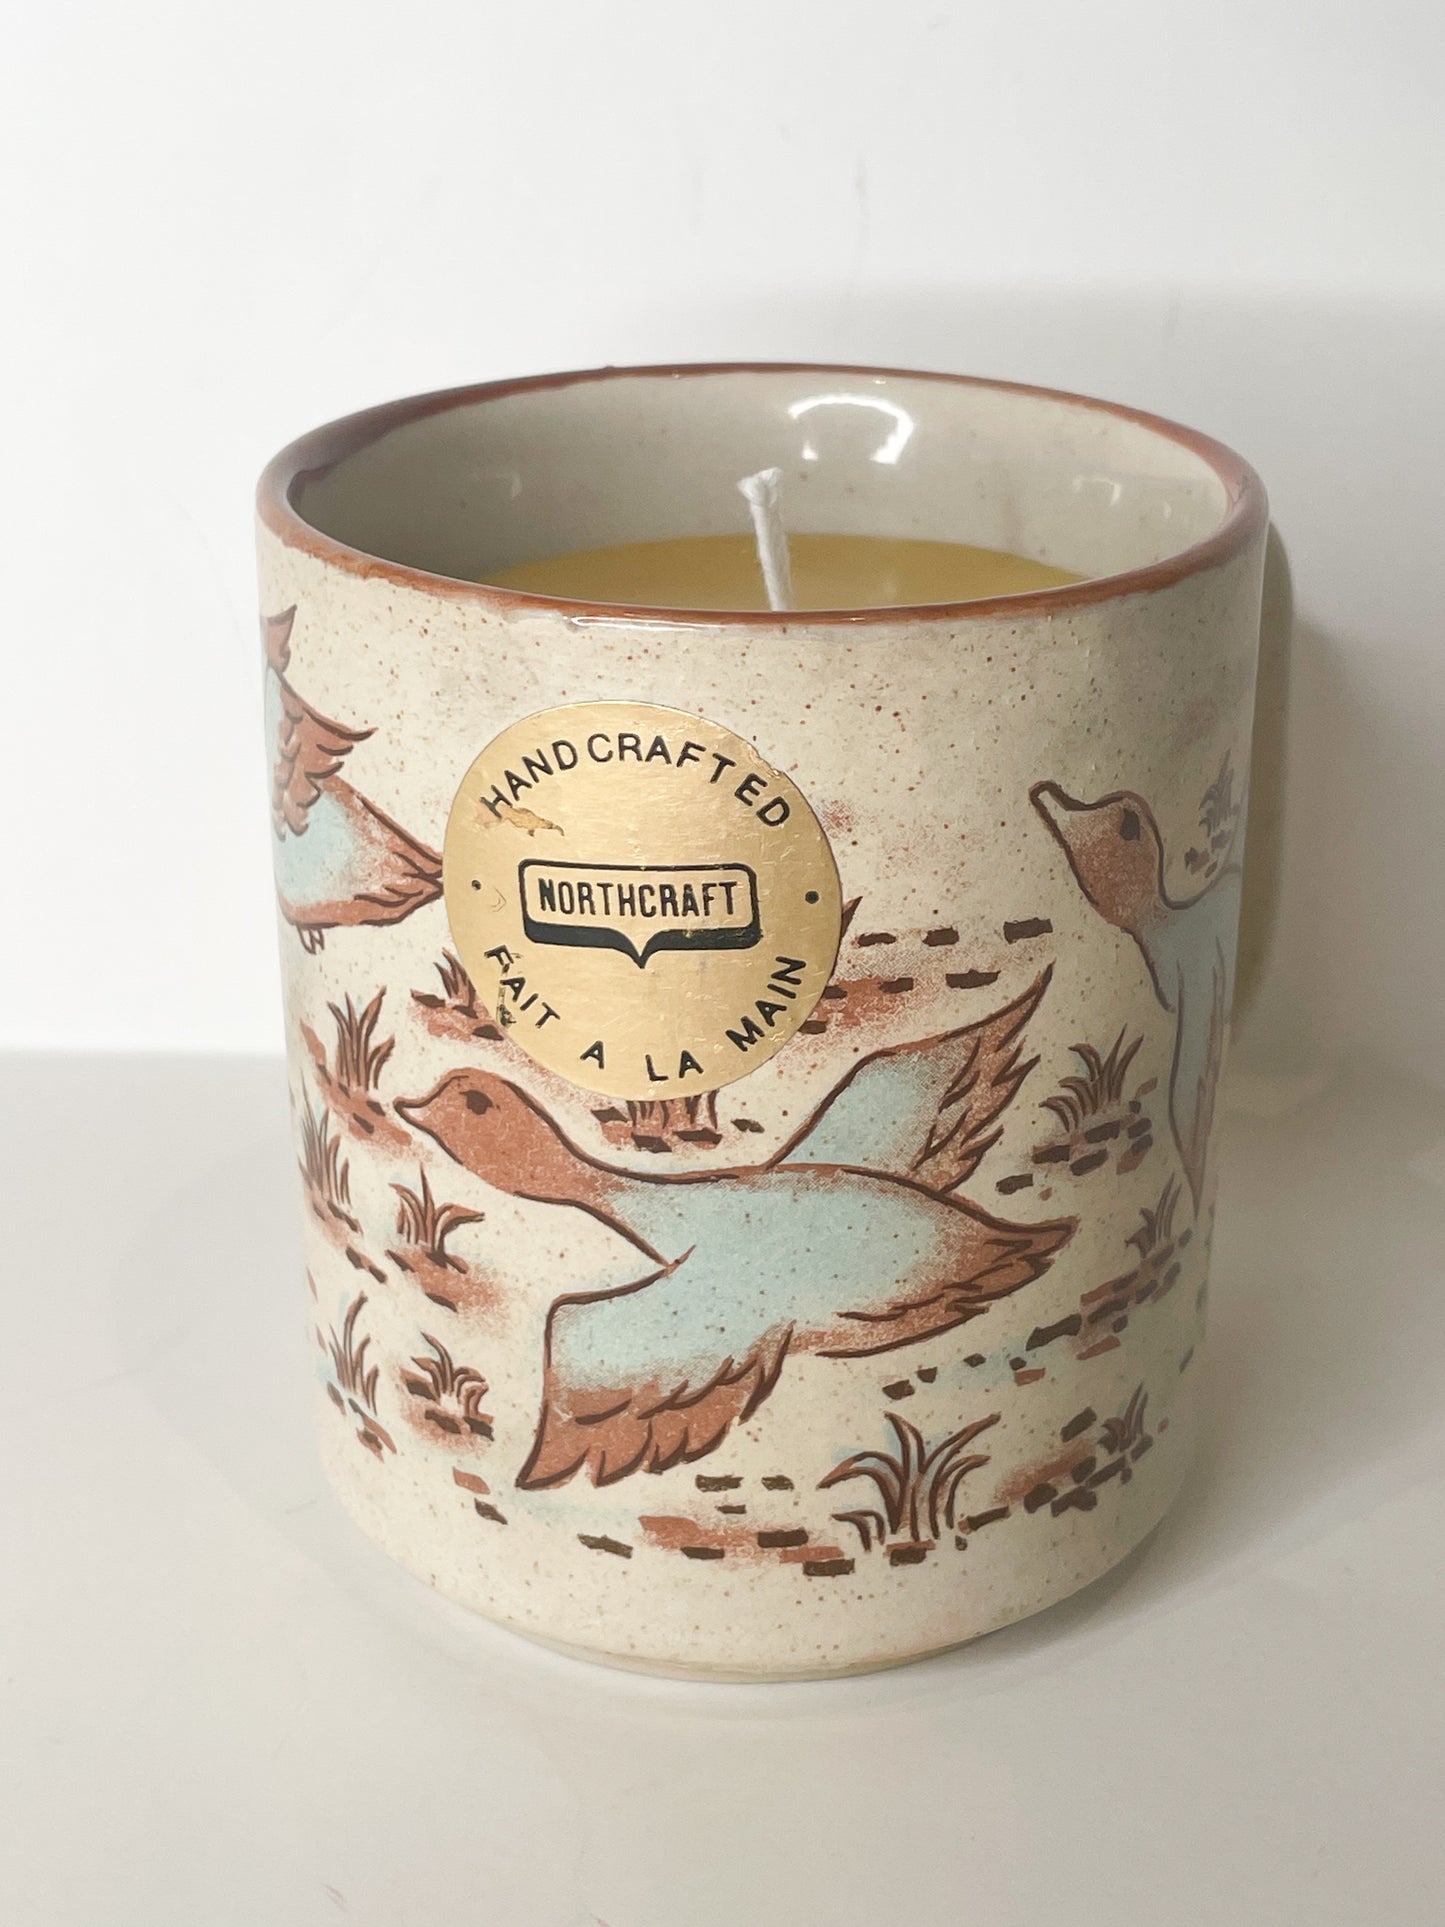 Ducks 100% Beeswax Upcycled Mug Candle - Cozy Citrus Vanilla Mint Scent